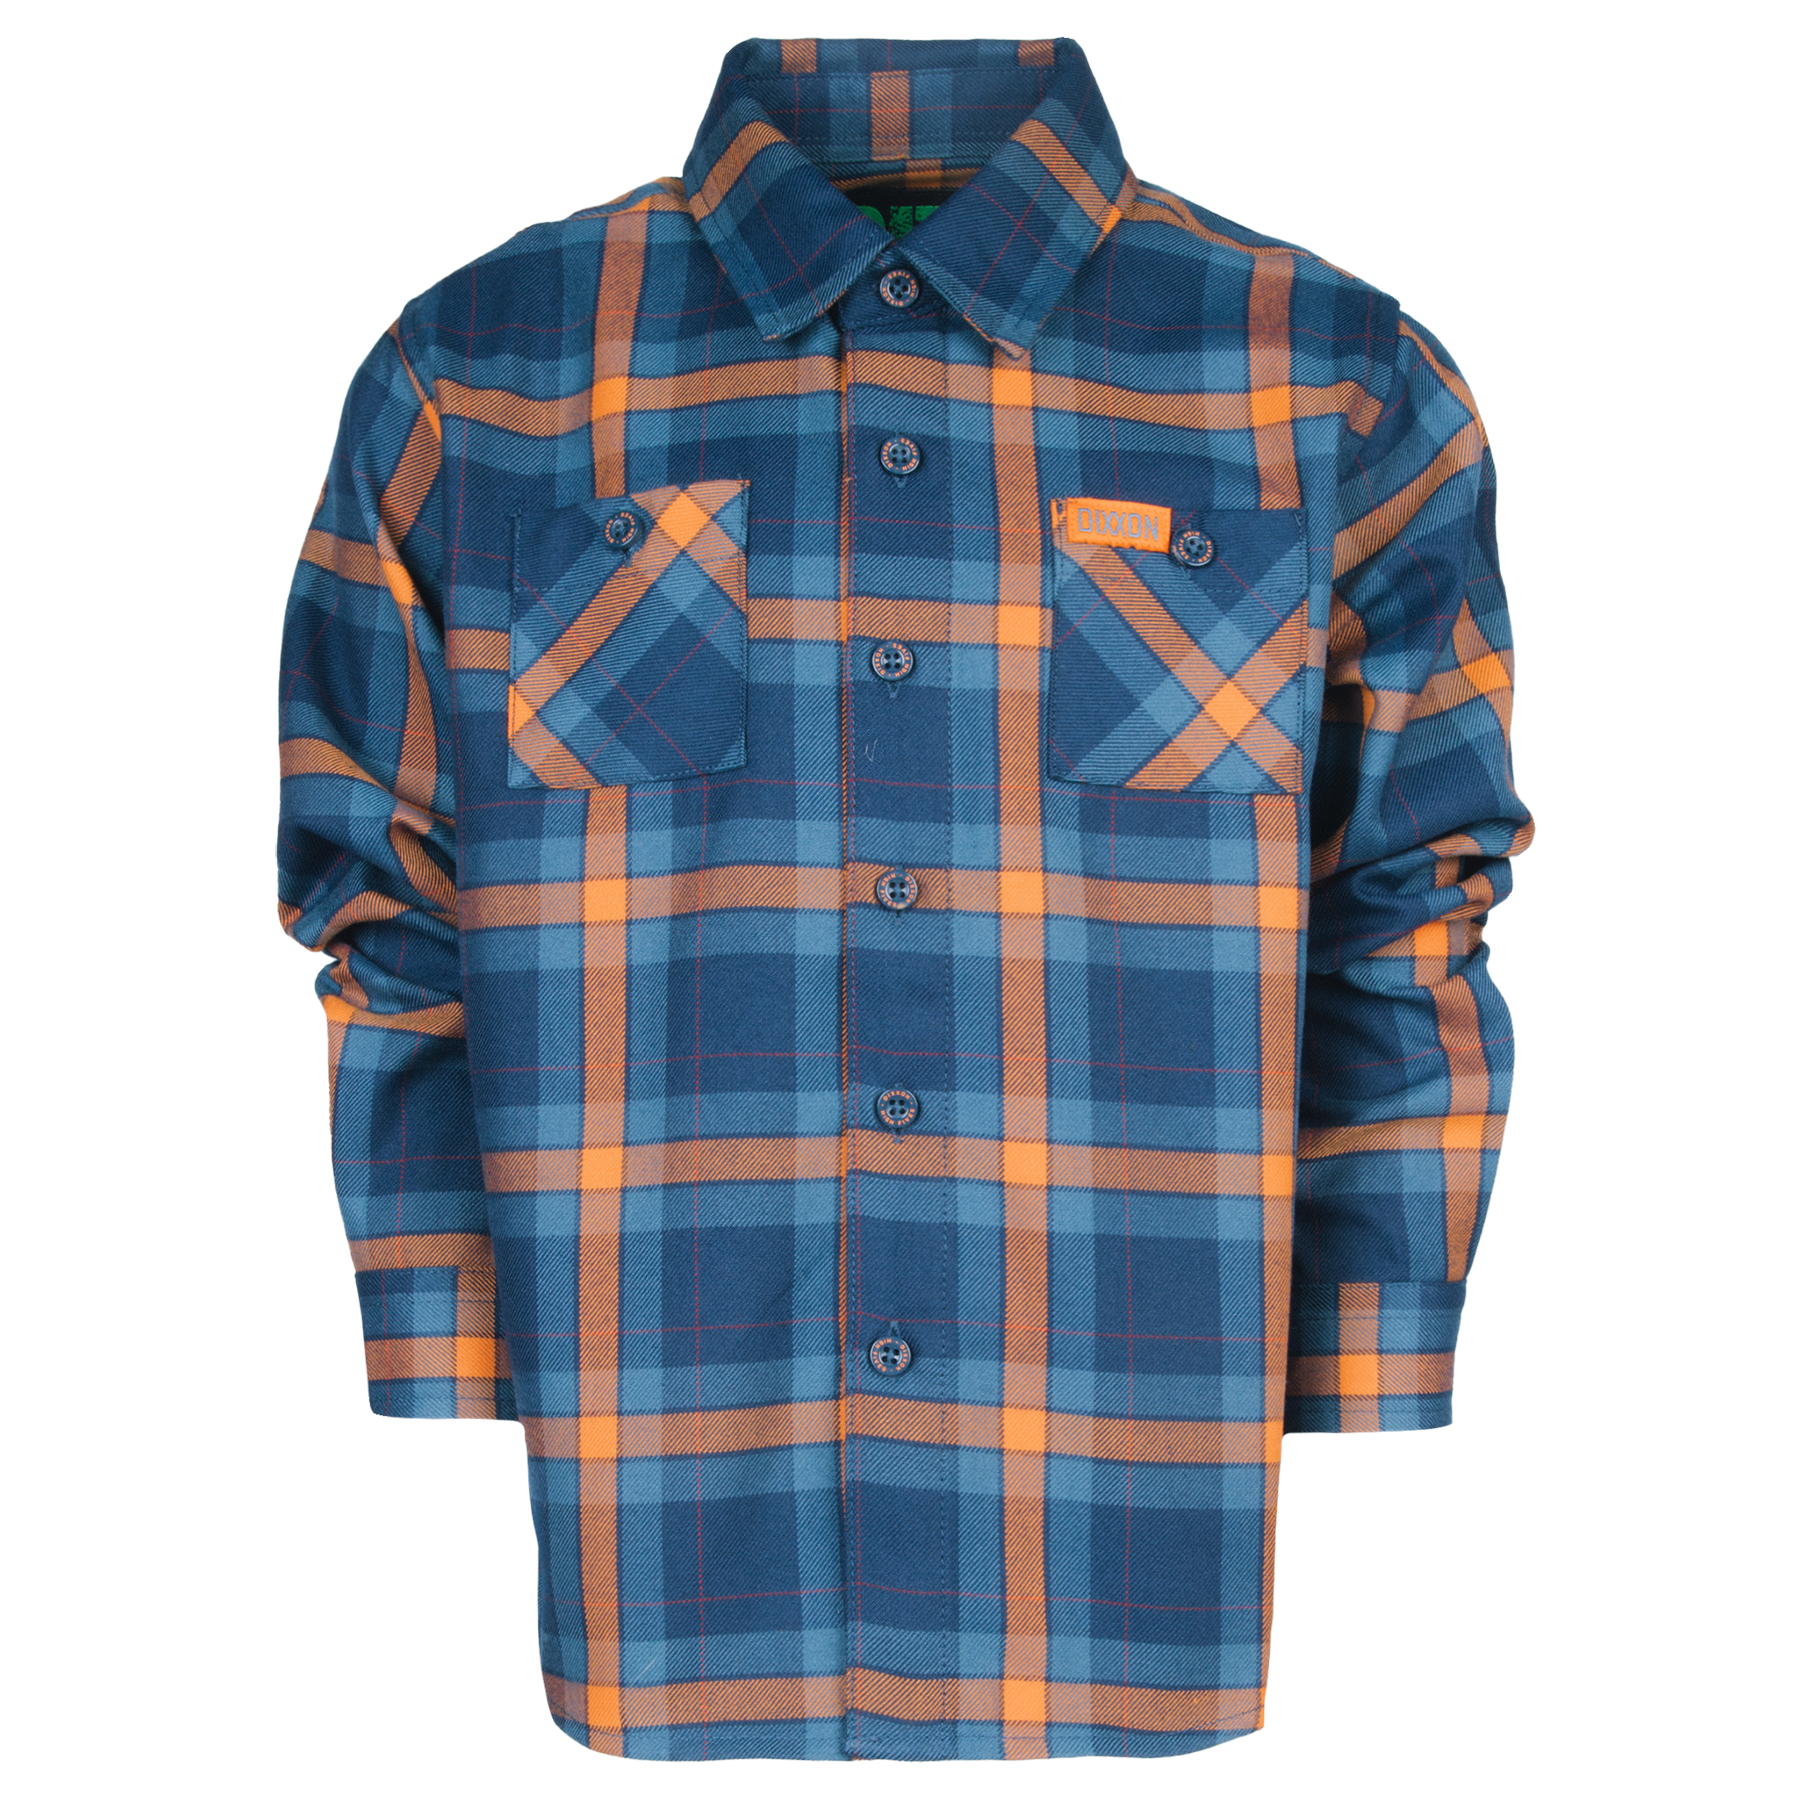 Youth High Fives Flannel | Dixxon Flannel Co.